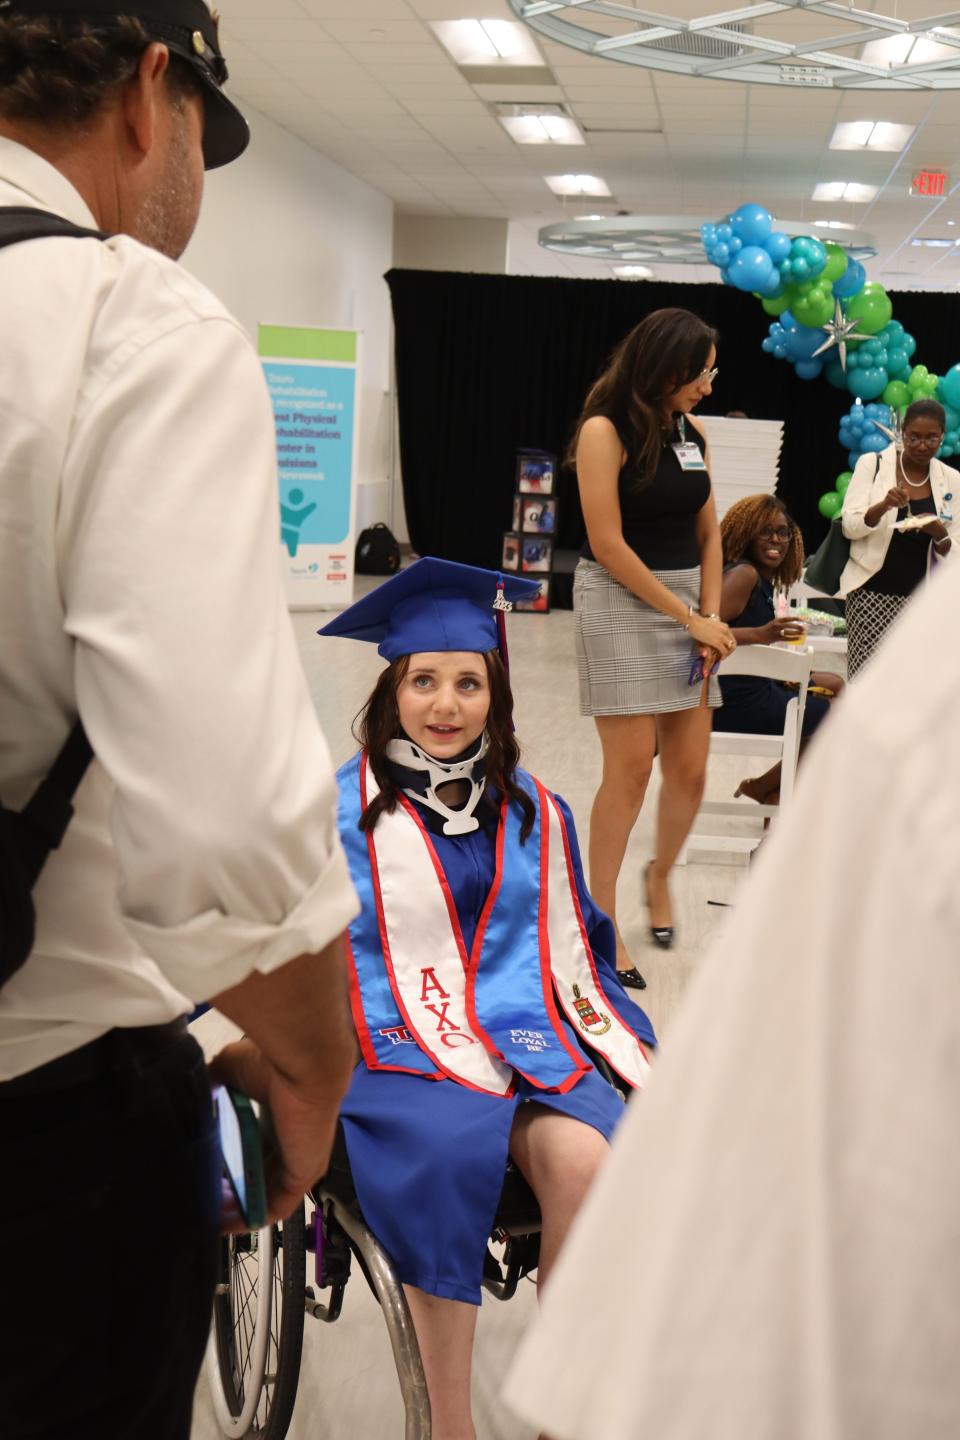 MacKenzie Maier talks to a member of the Refried Confuzion brass band June 23 after her graduation ceremony in New Orleans. The Louisiana Tech University graduate was seriously injured in a car crash, so she couldn't participate in the ceremony in Ruston.